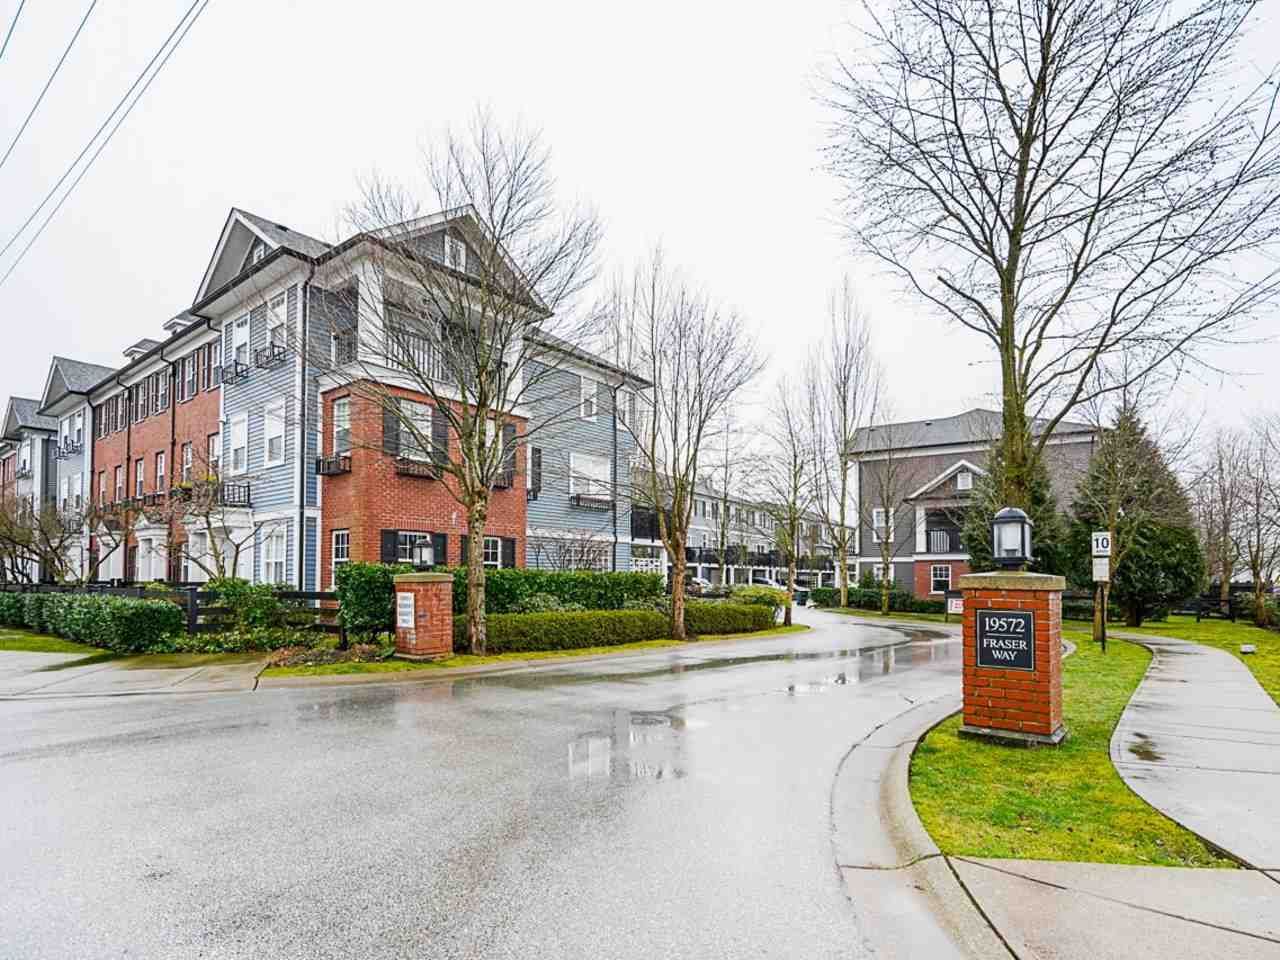 Main Photo: 30 19572 FRASER WAY in Pitt Meadows: South Meadows Townhouse for sale : MLS®# R2540843